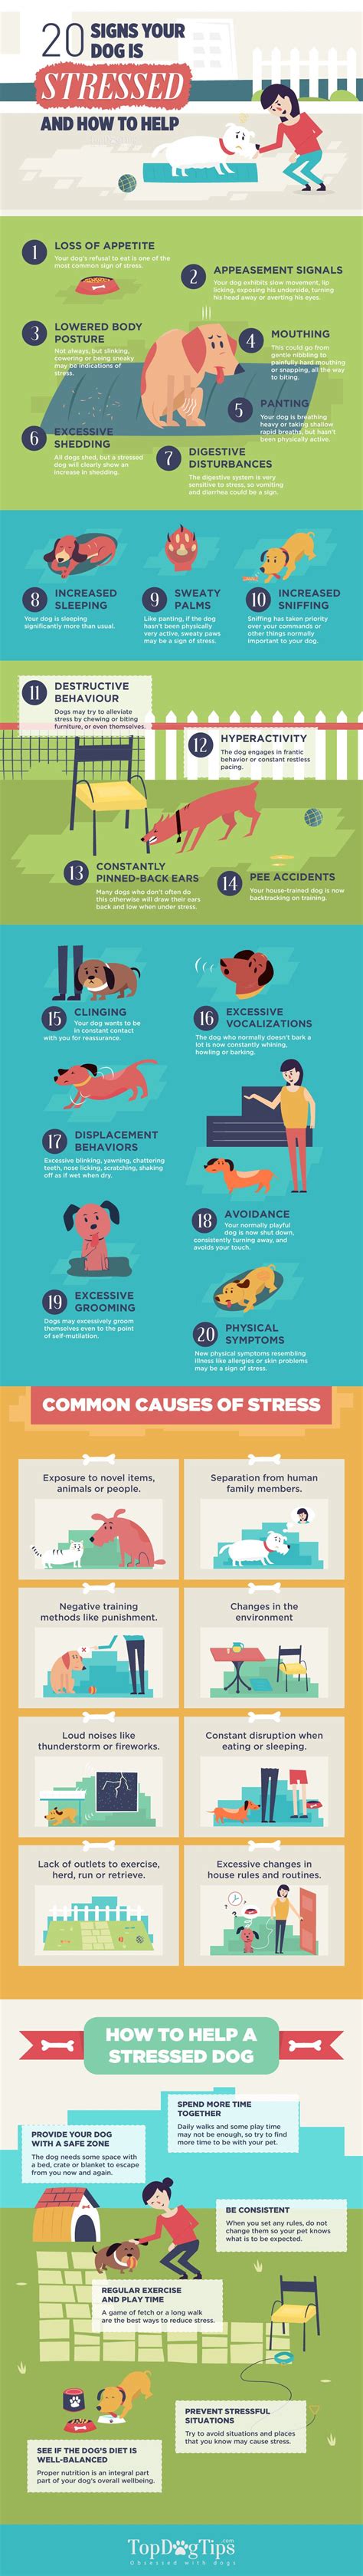 20 Signs Of Stress In Dogs And How To Relieve Stress In Your Dog